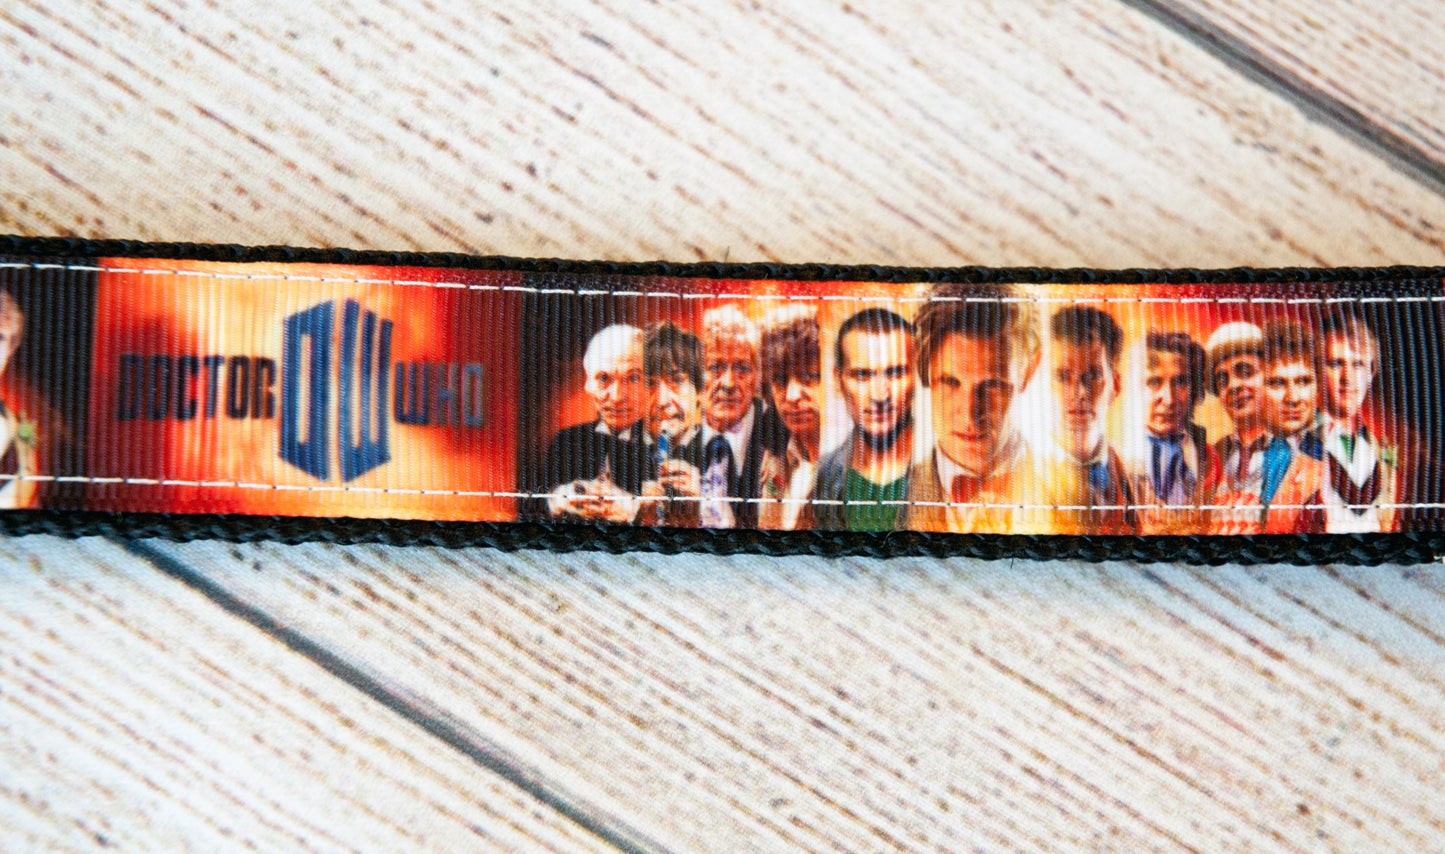 Doctor DW Who dog collar and/or leash. 1 inch wide